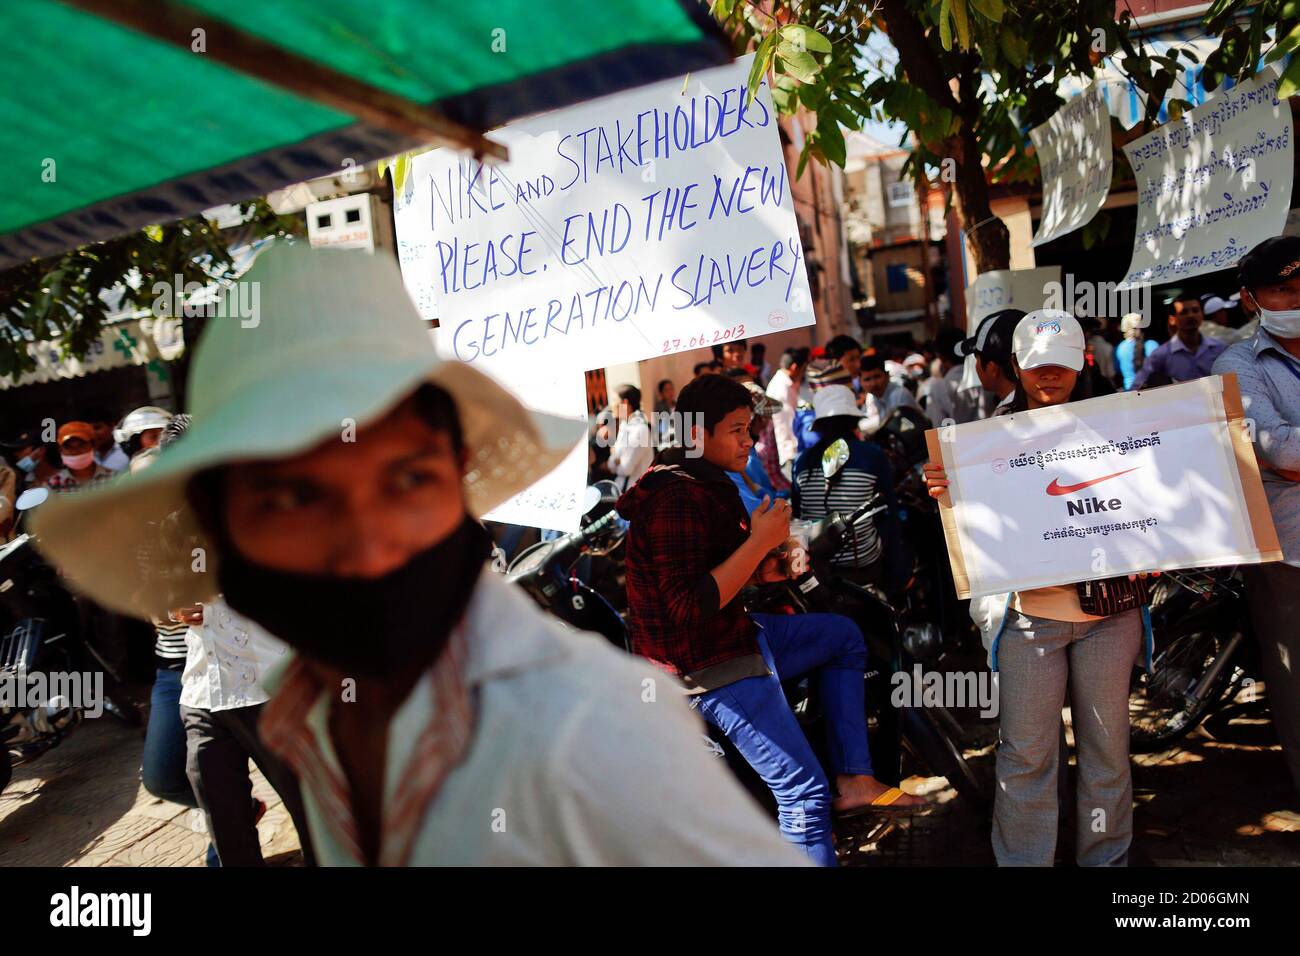 Garment workers hold signs during a gathering of workers from Sabrina ( Cambodia) Garment Manufacturing Corp, which produces clothing for U.S.  sportswear company Nike, at their union headquarters in Phnom Penh June 27,